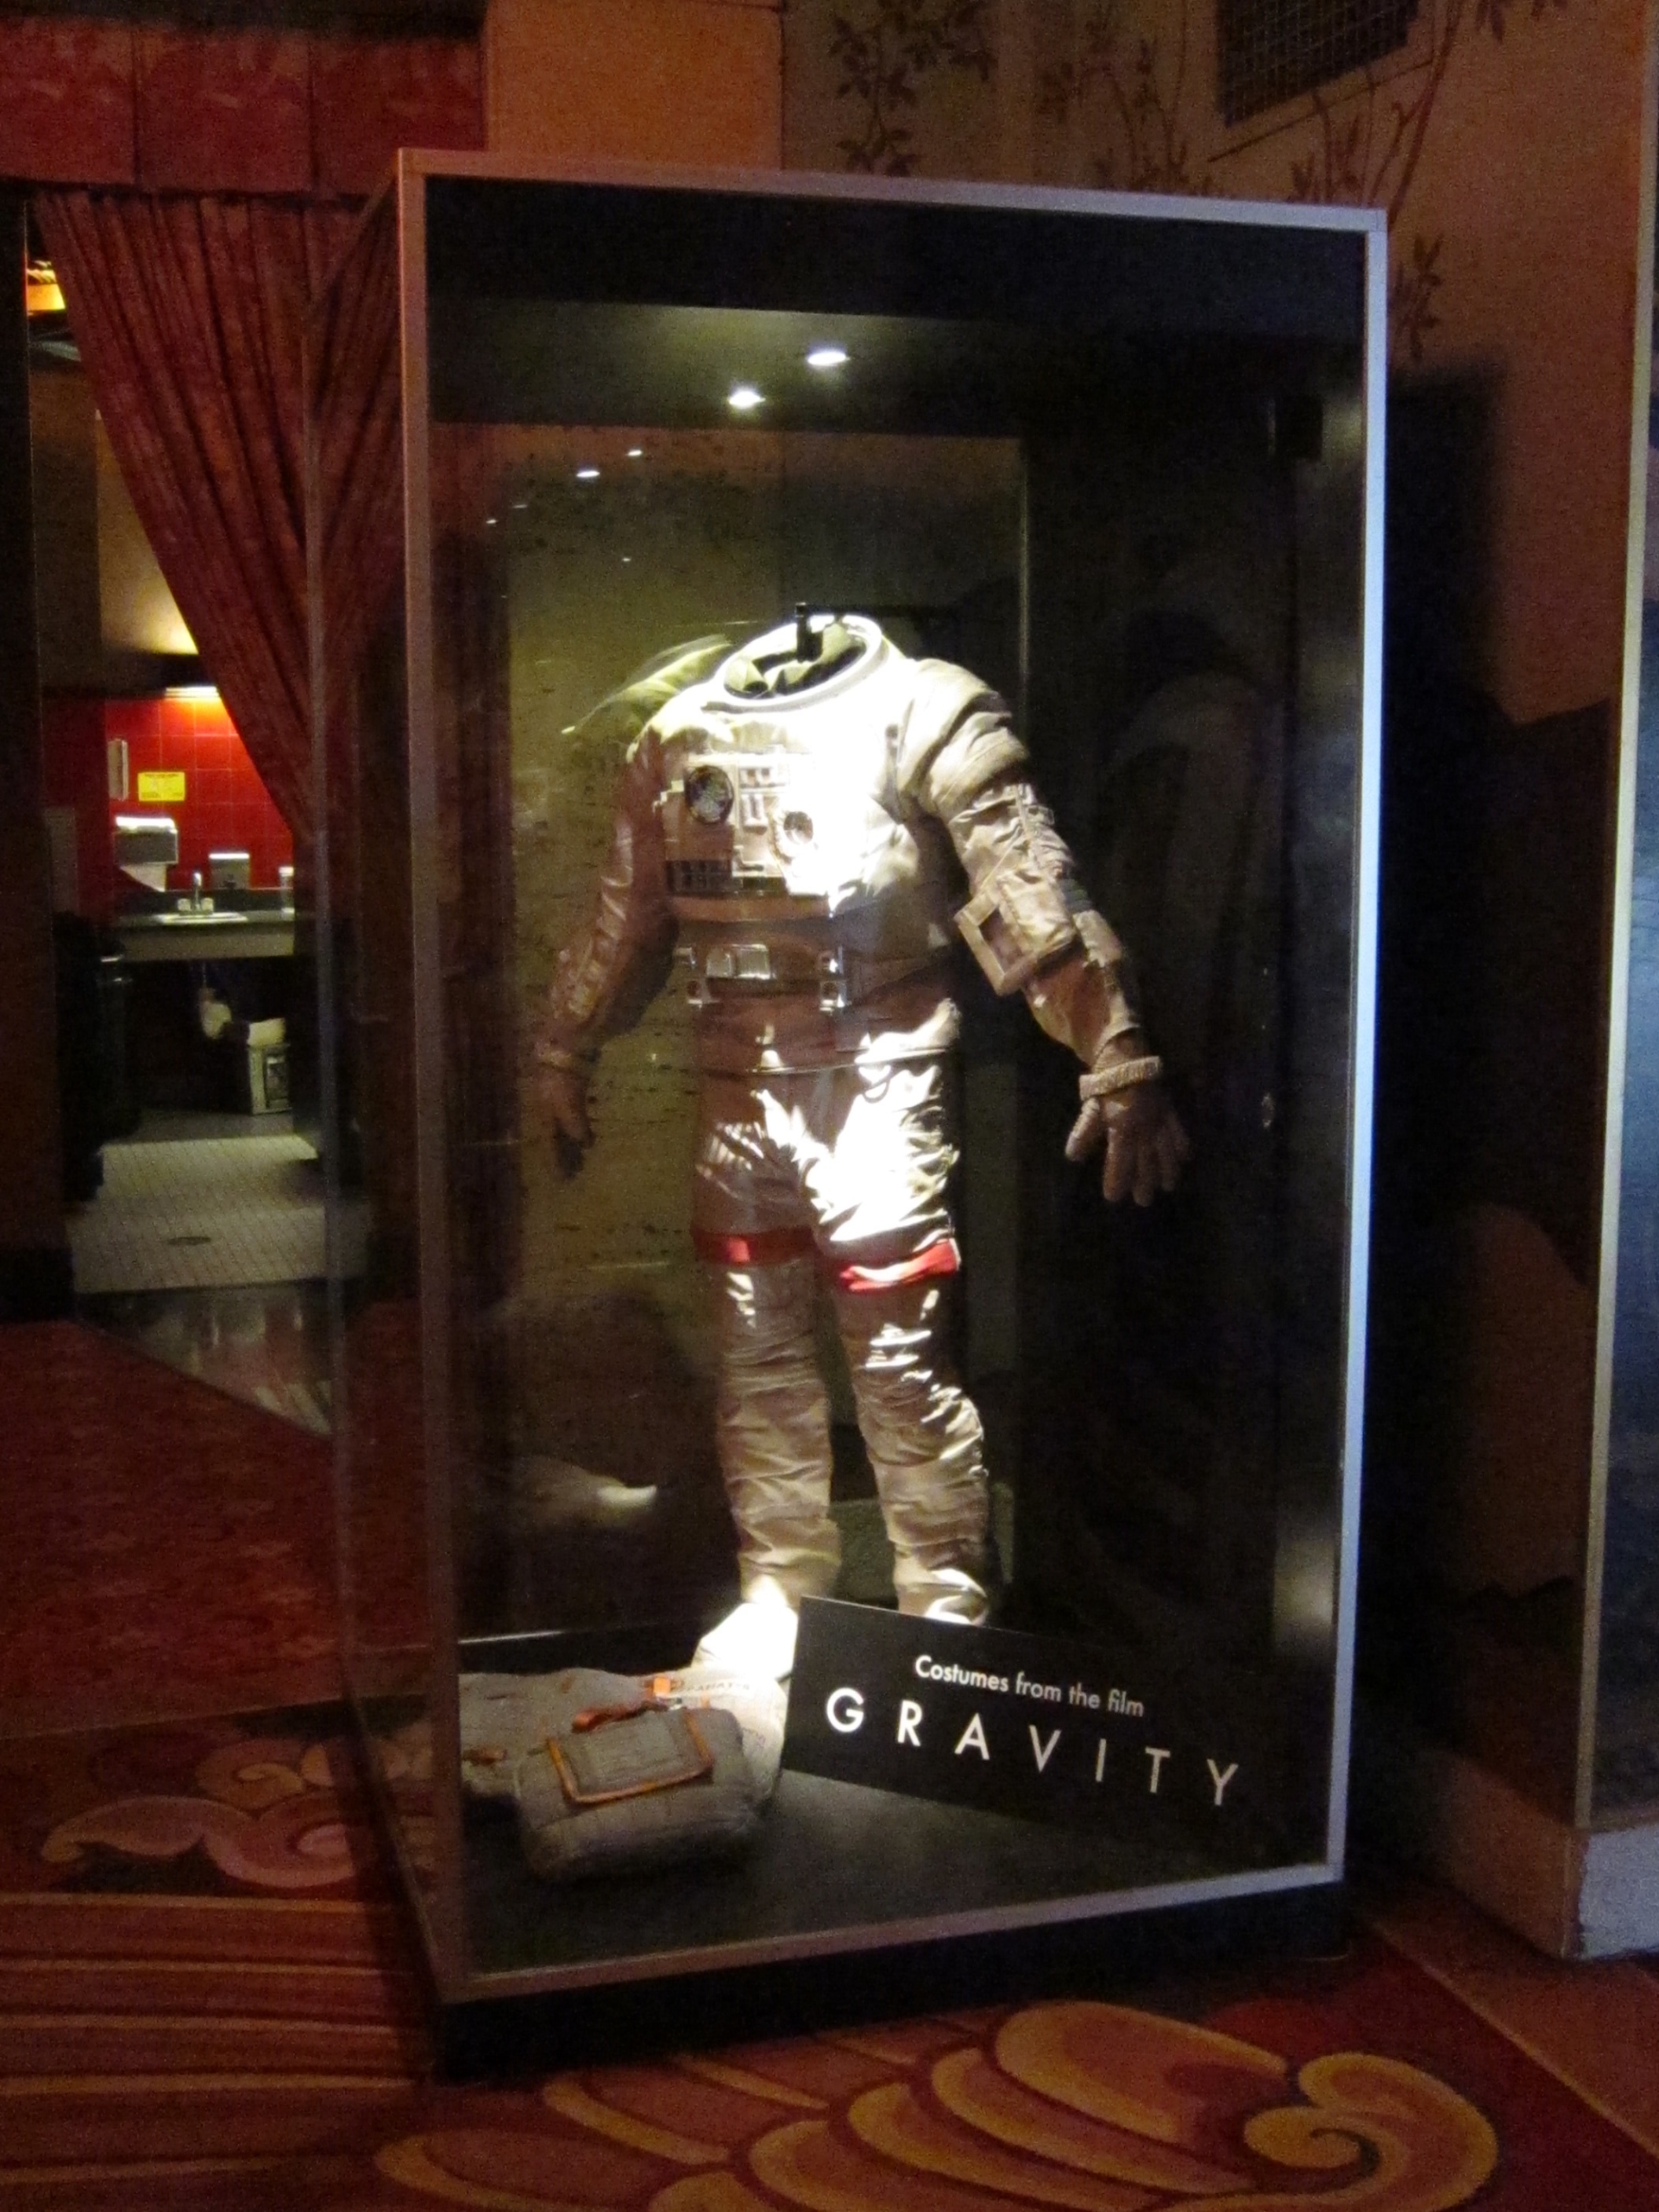 George Clooney's space suit with some props used in the making of GRAVITY.